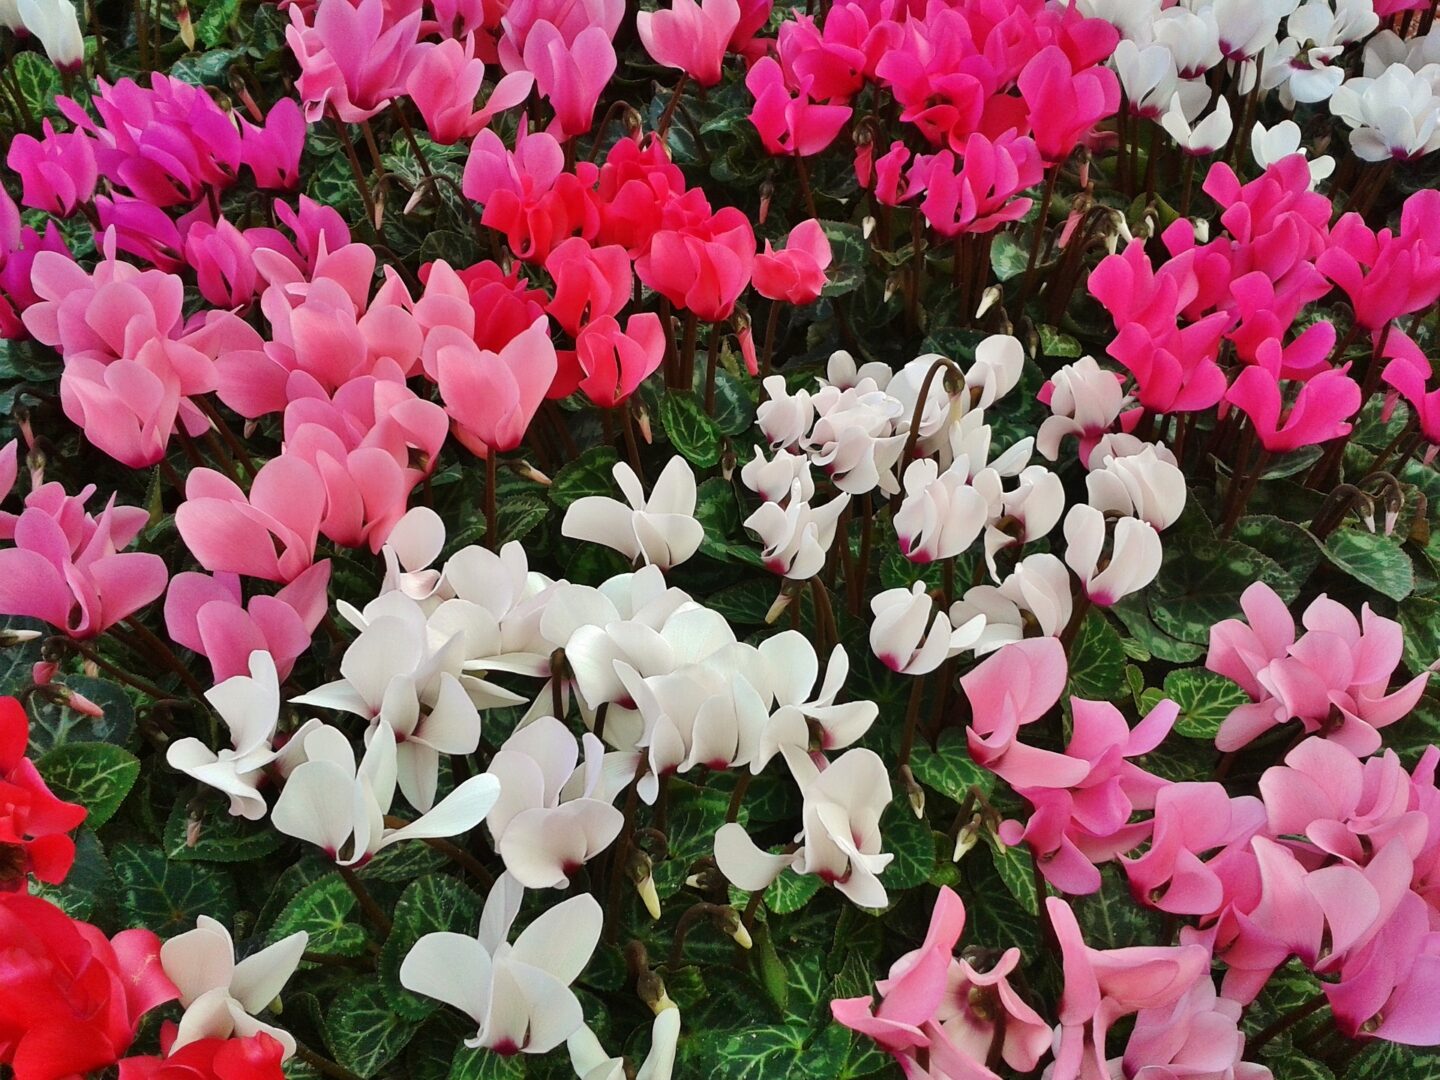 Various colors of cyclamen on display